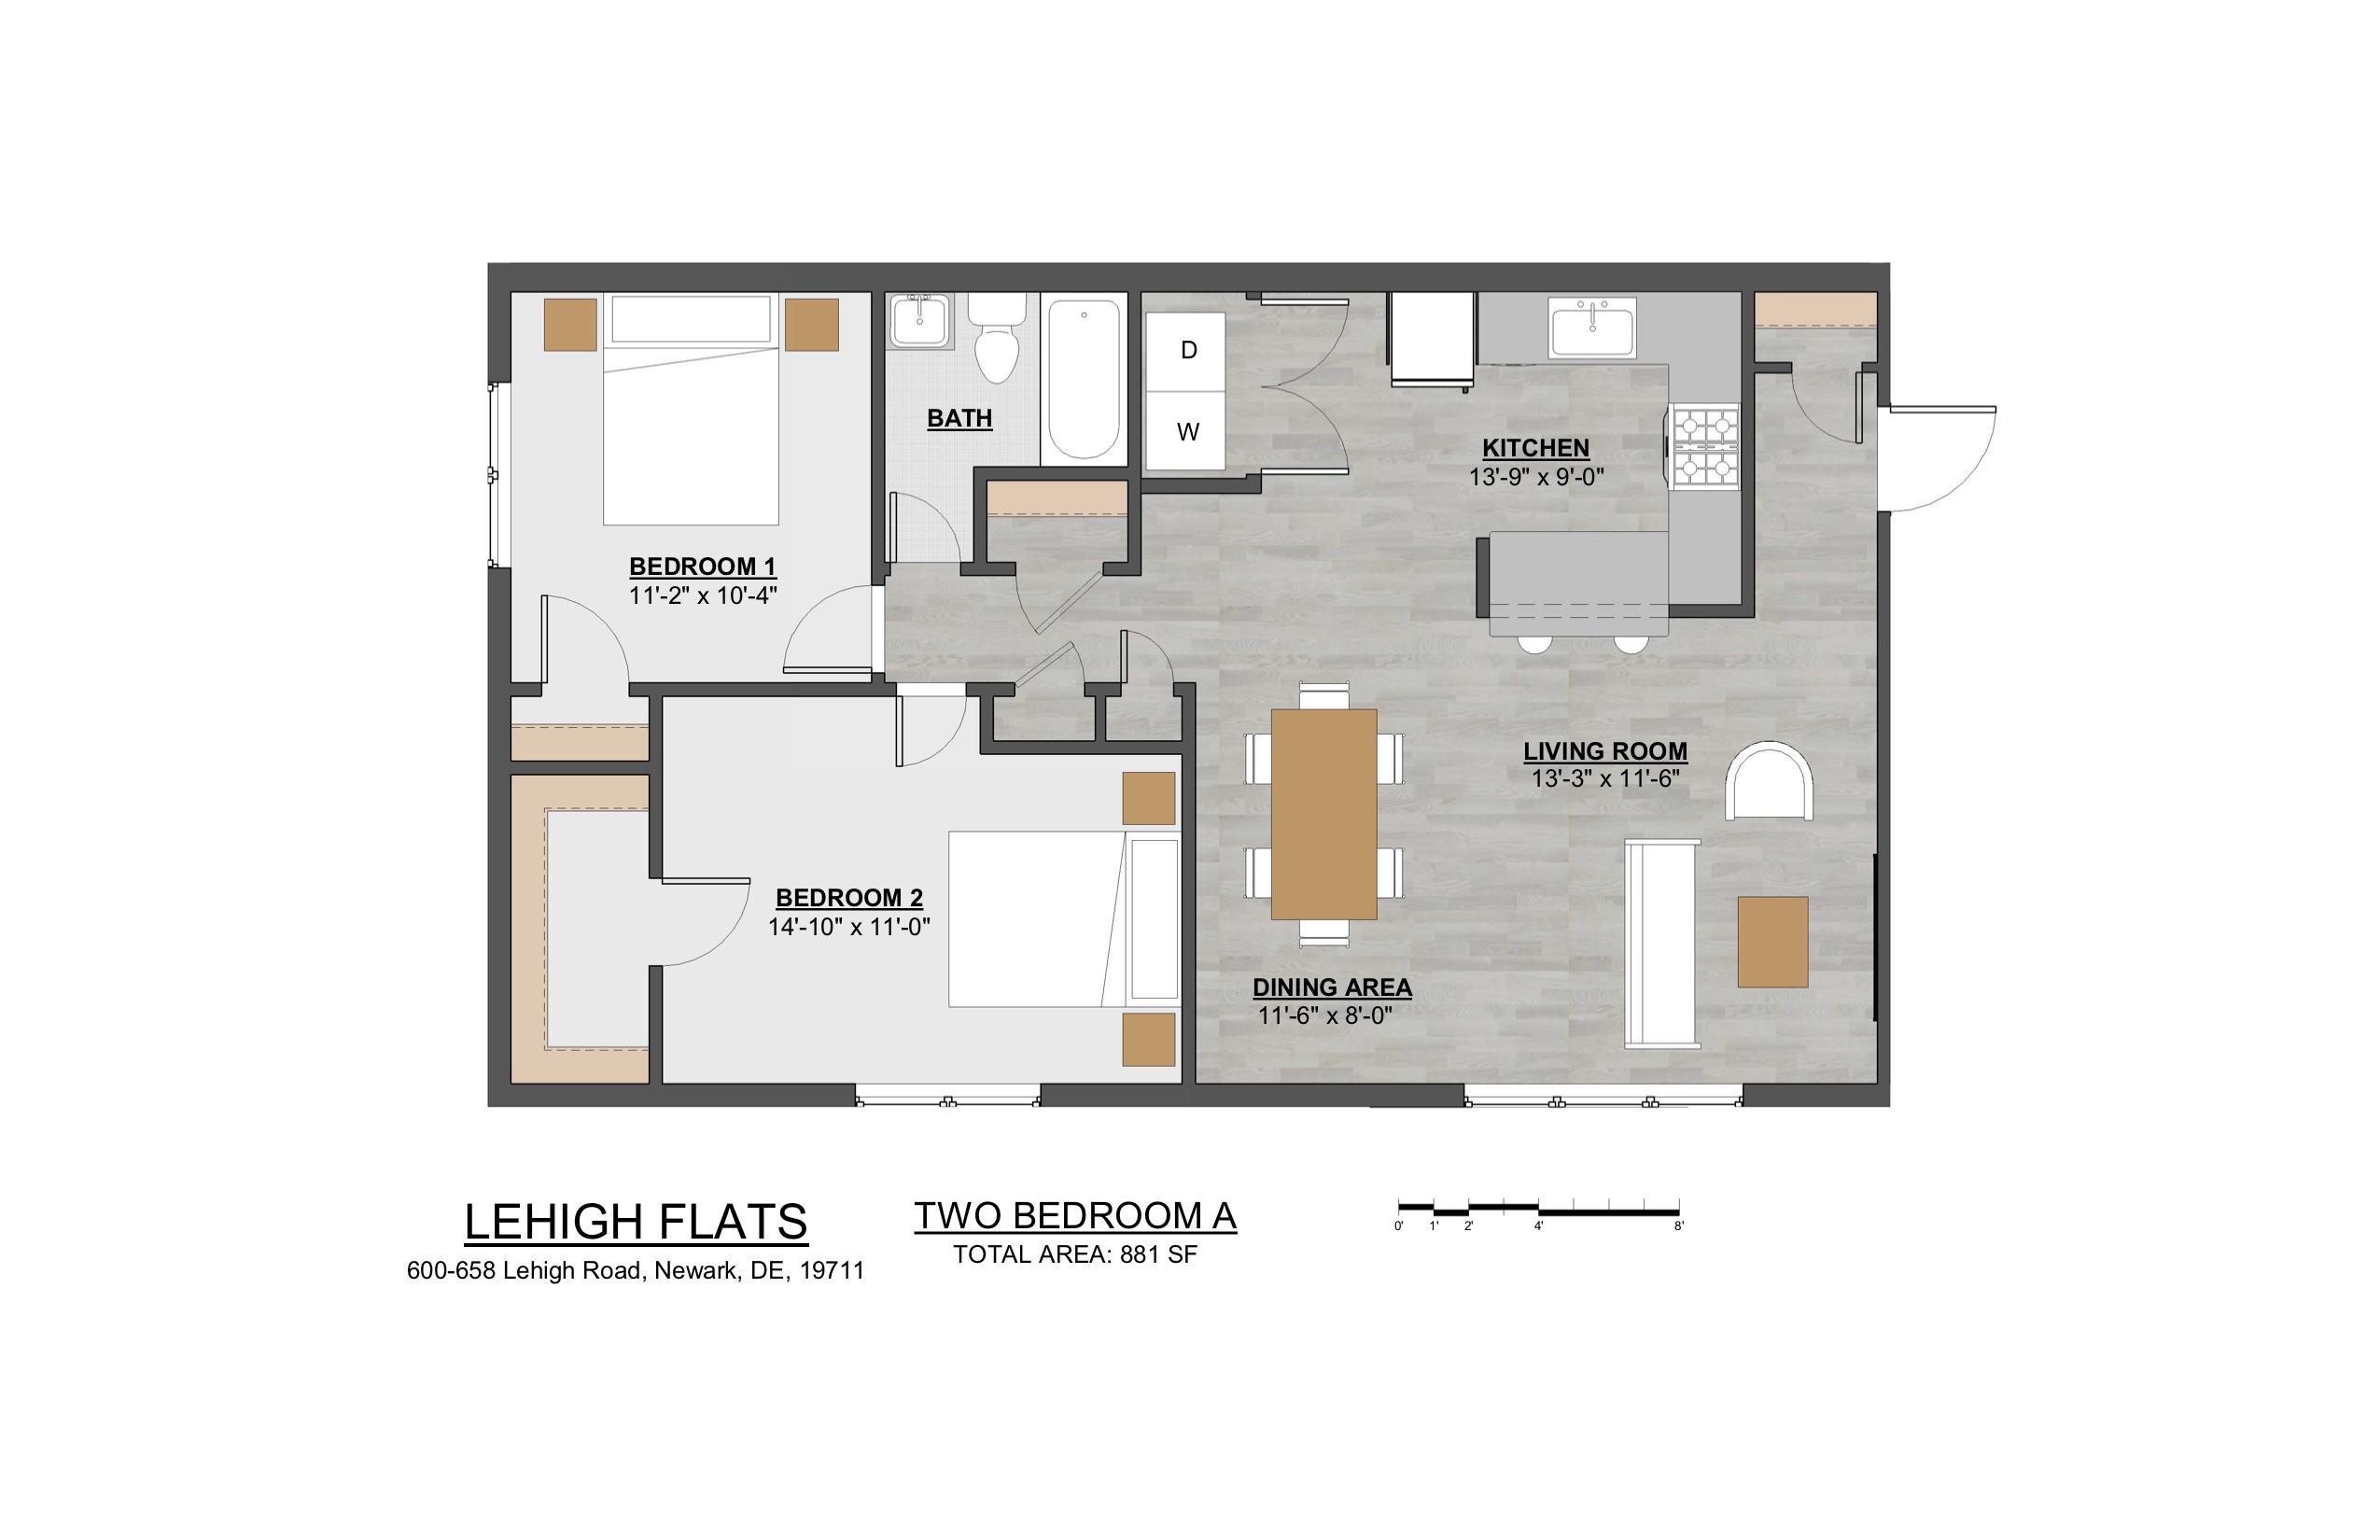 Two Bedroom Jr. A 881 Square Feet